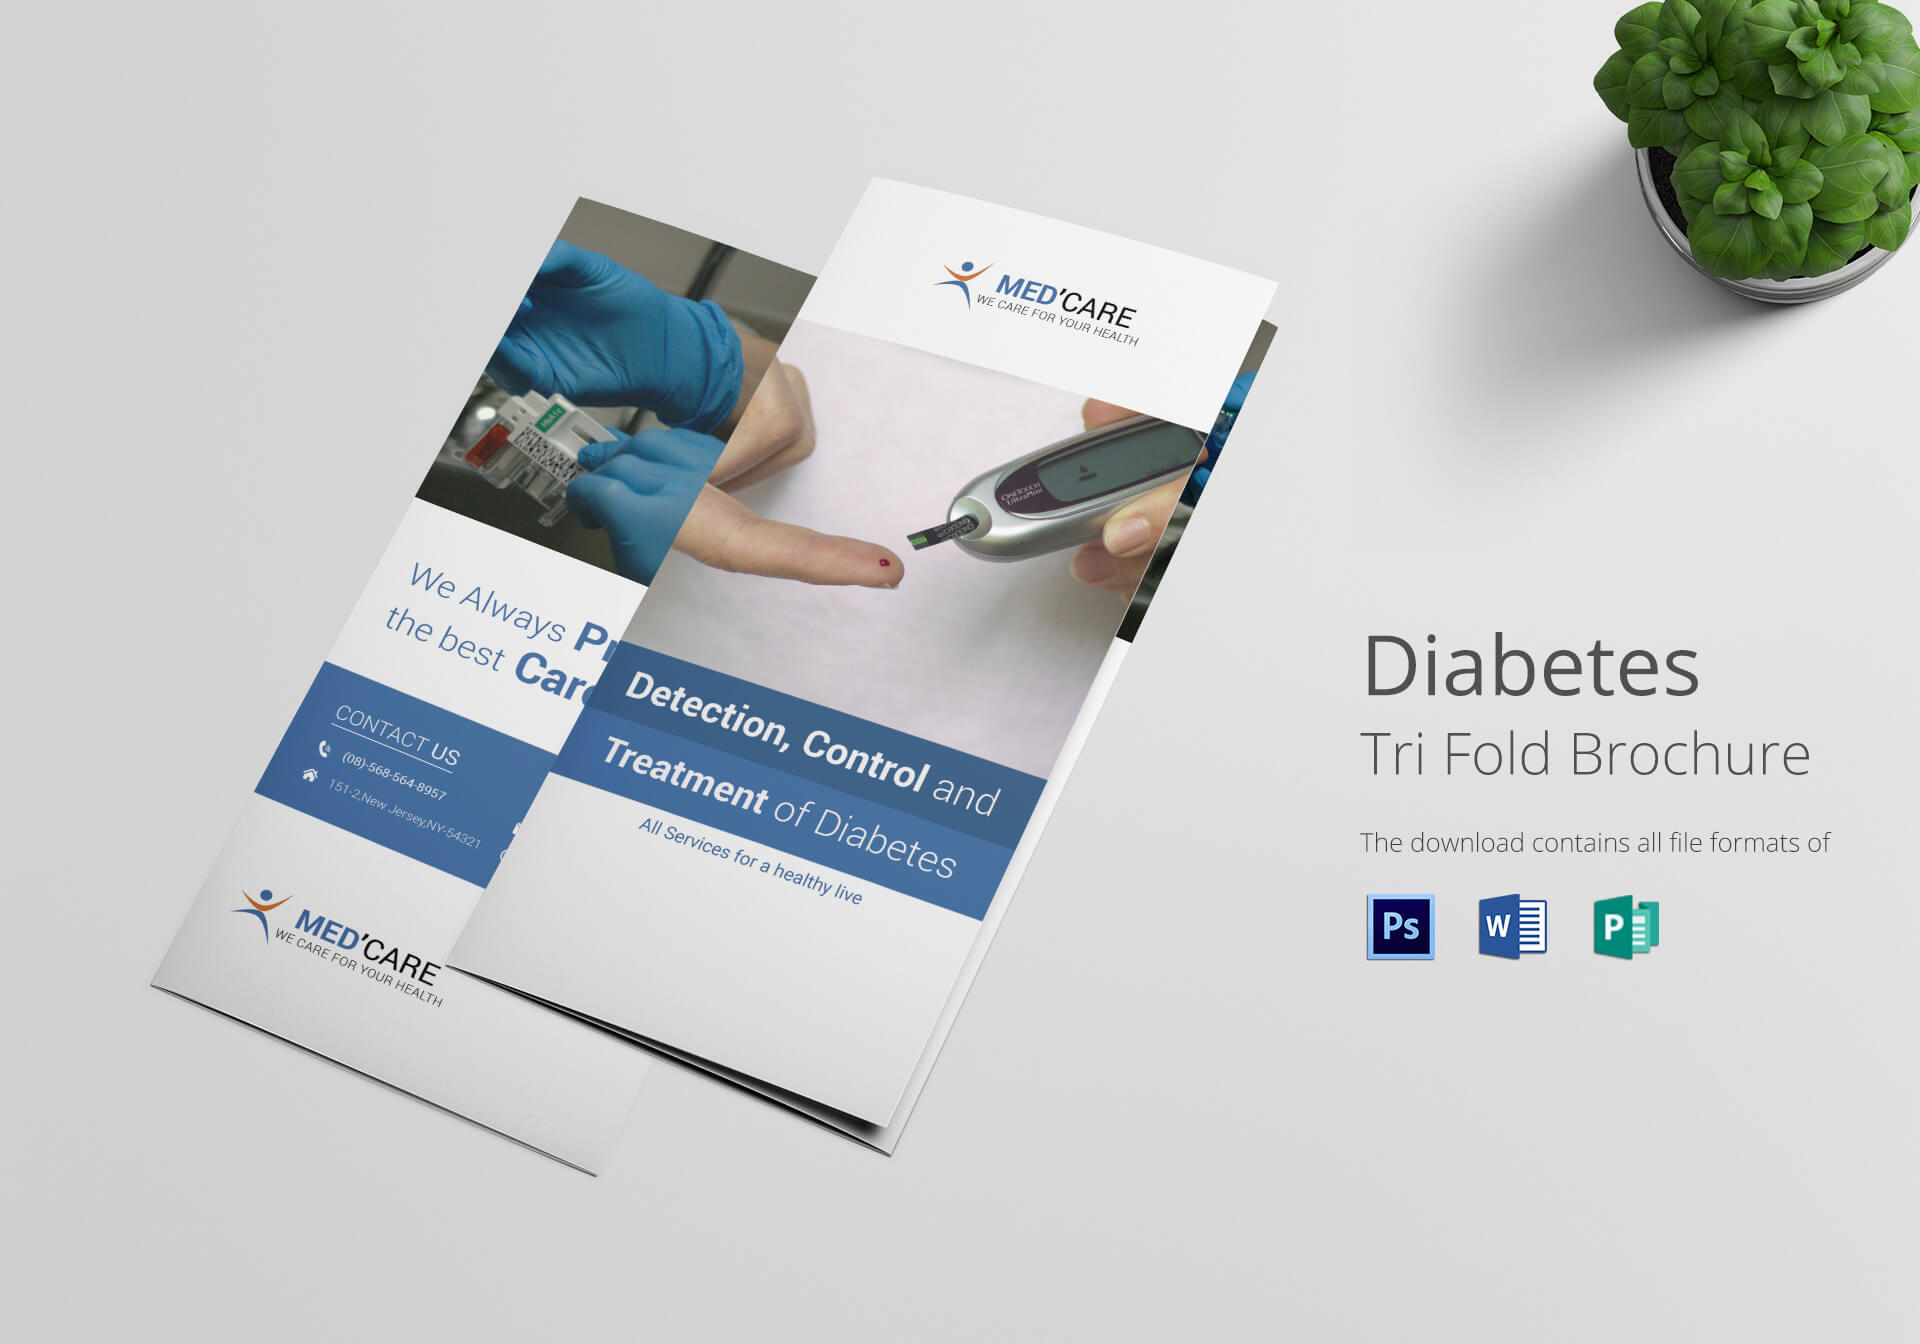 Diabetes Brochure Trifold Template For Tri Fold Brochure Publisher Template